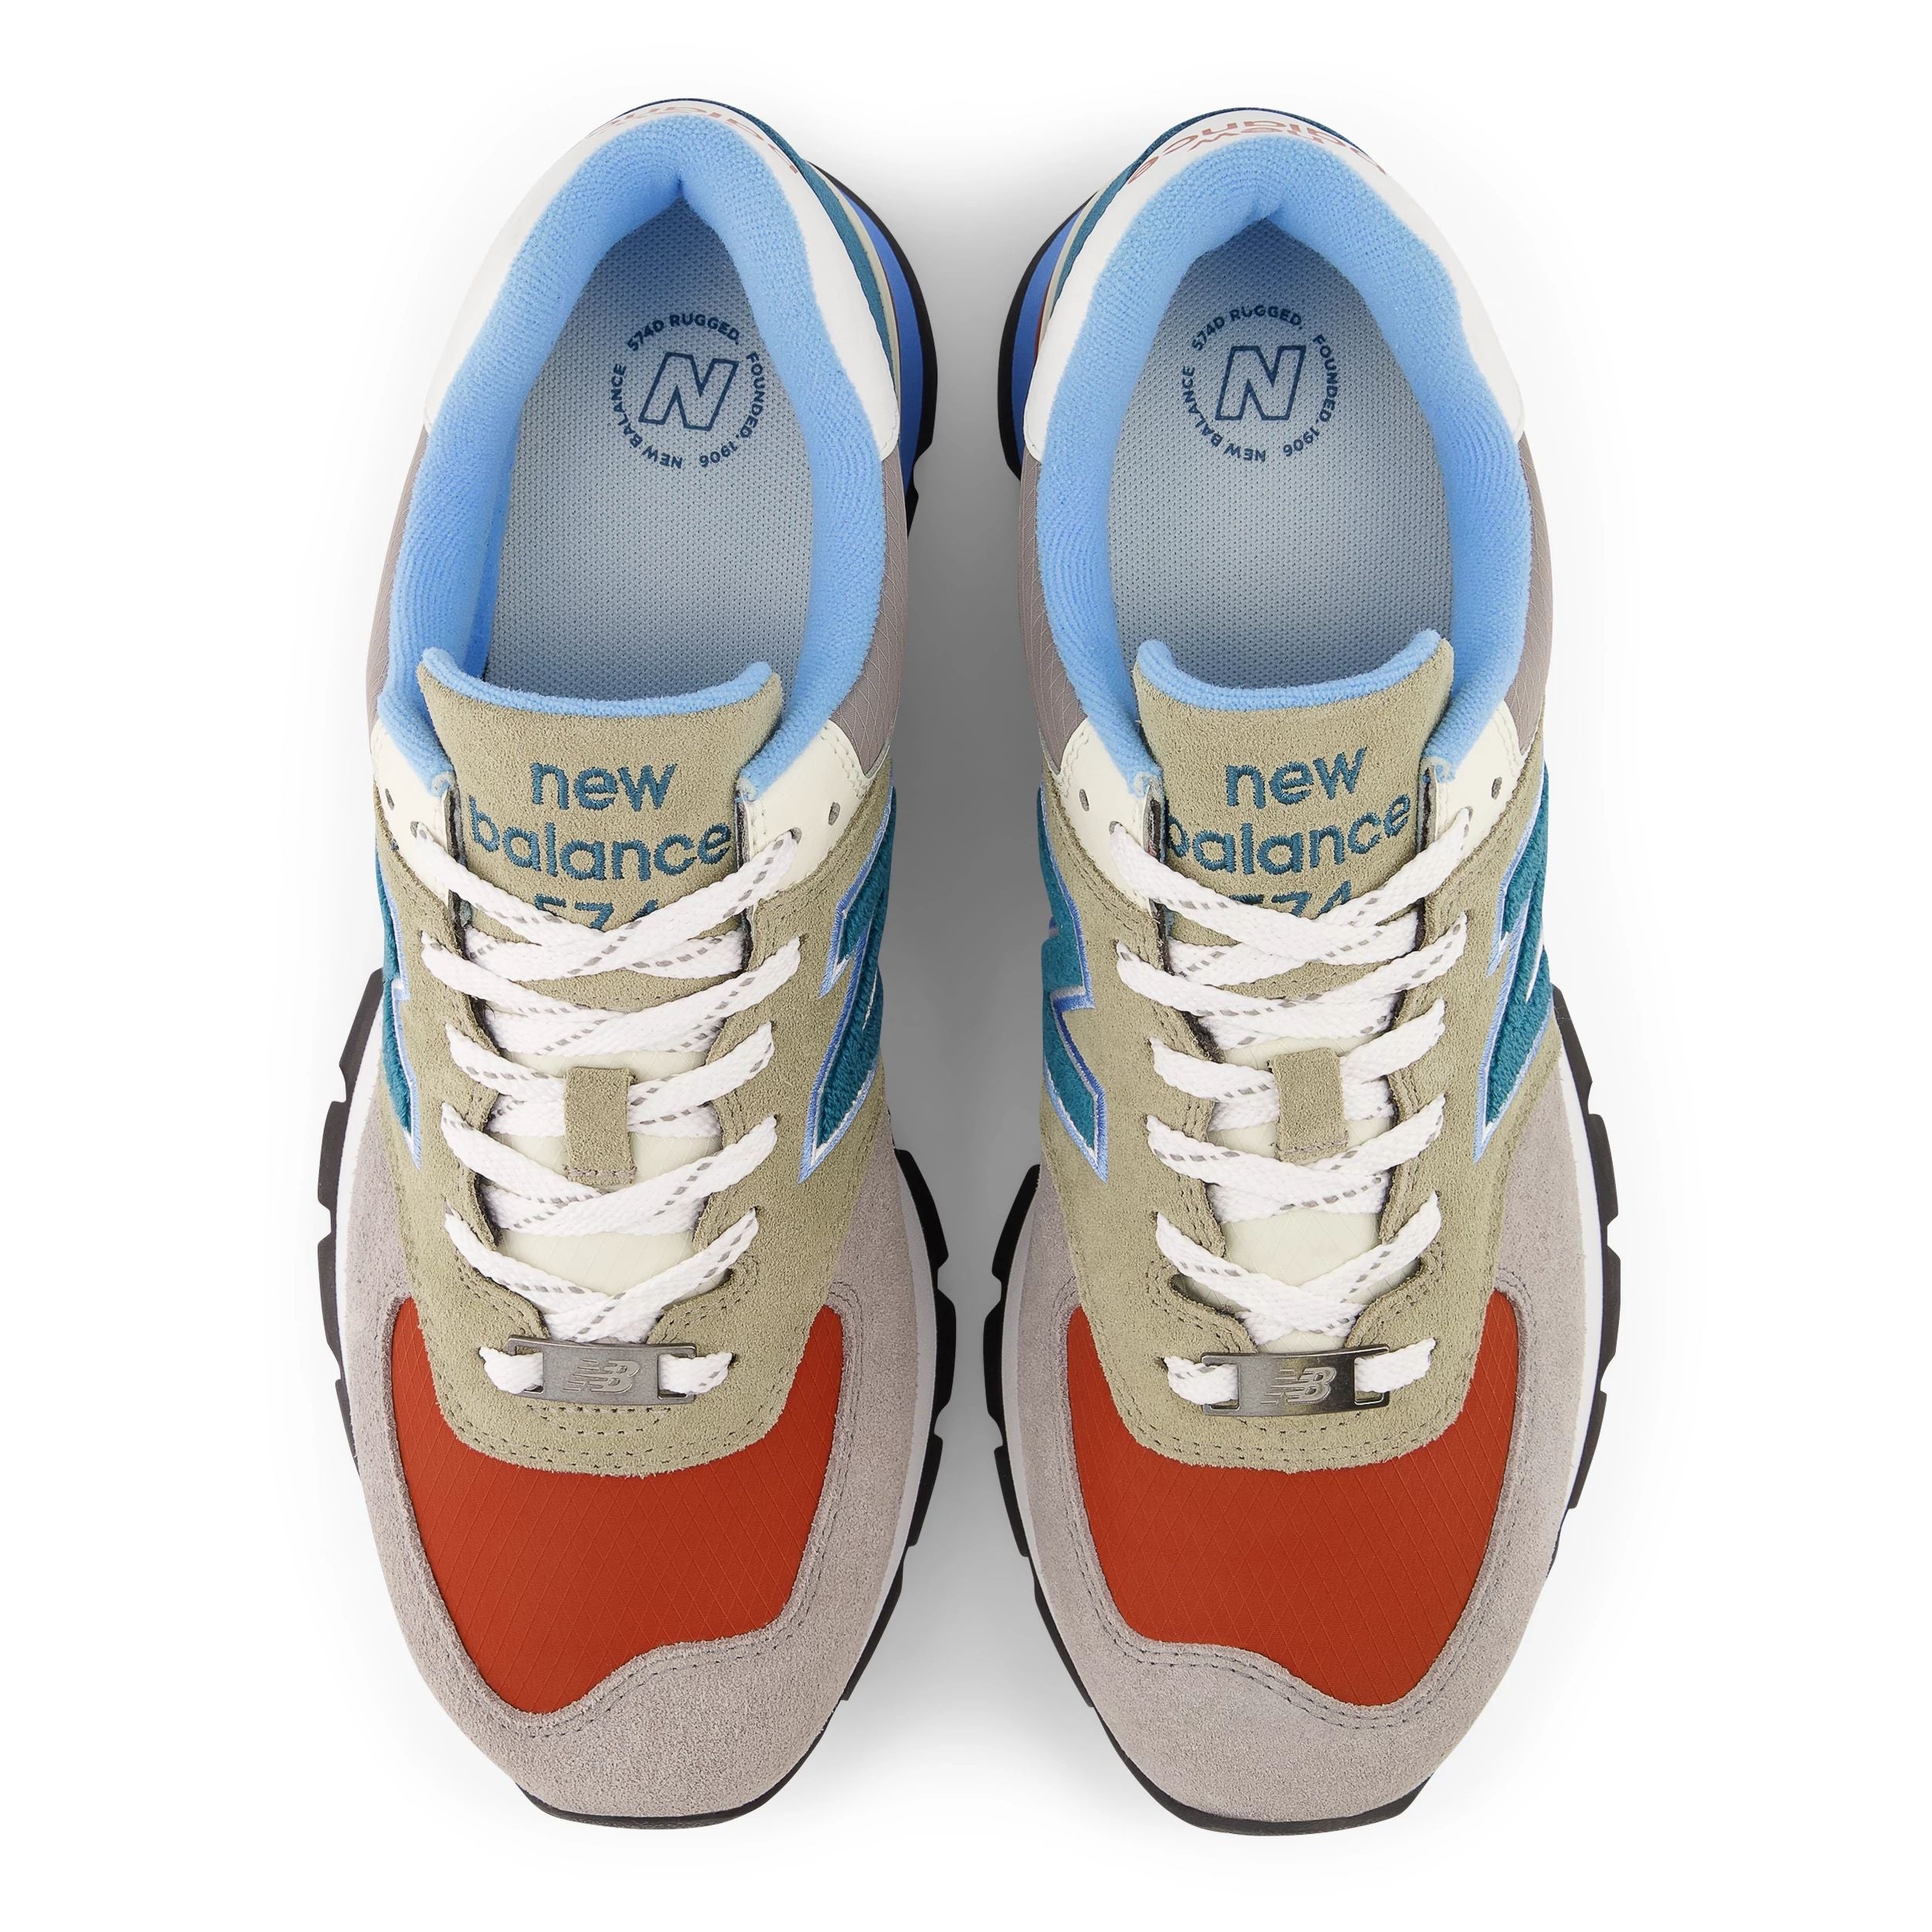 Top view of the Men's 574 by New Balance in the color Grey/Blue